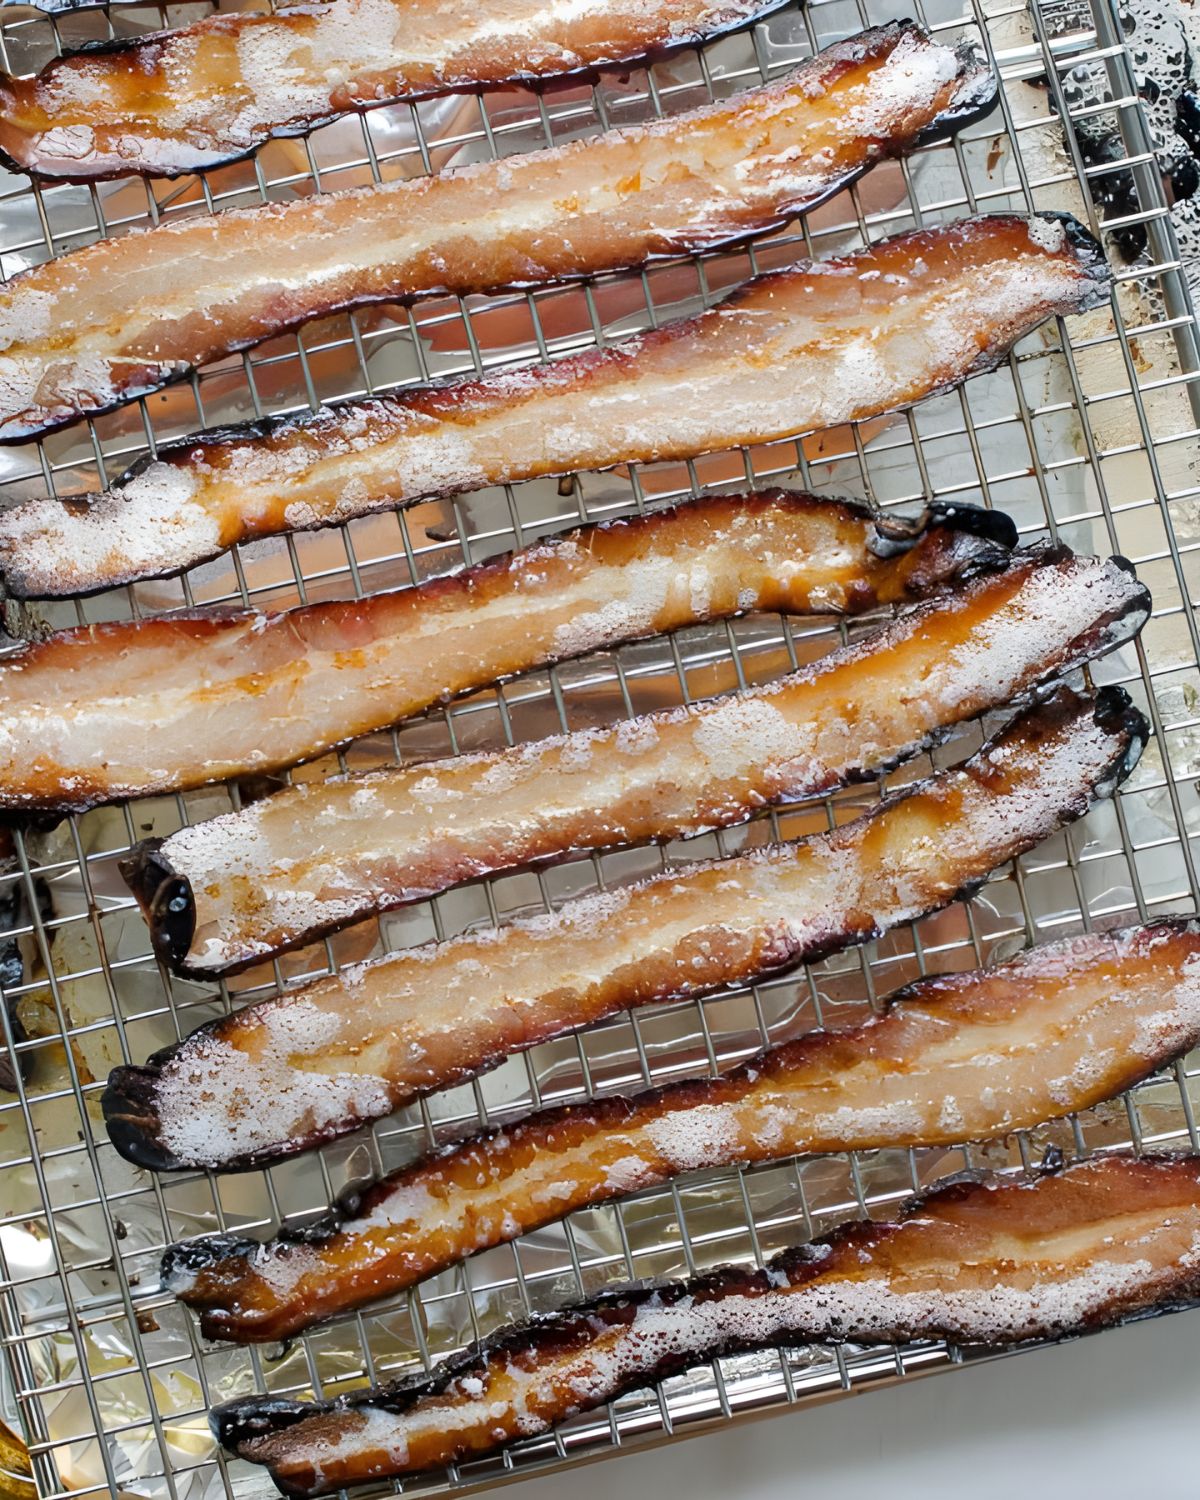 frying applewood bacon on a rack in the oven.